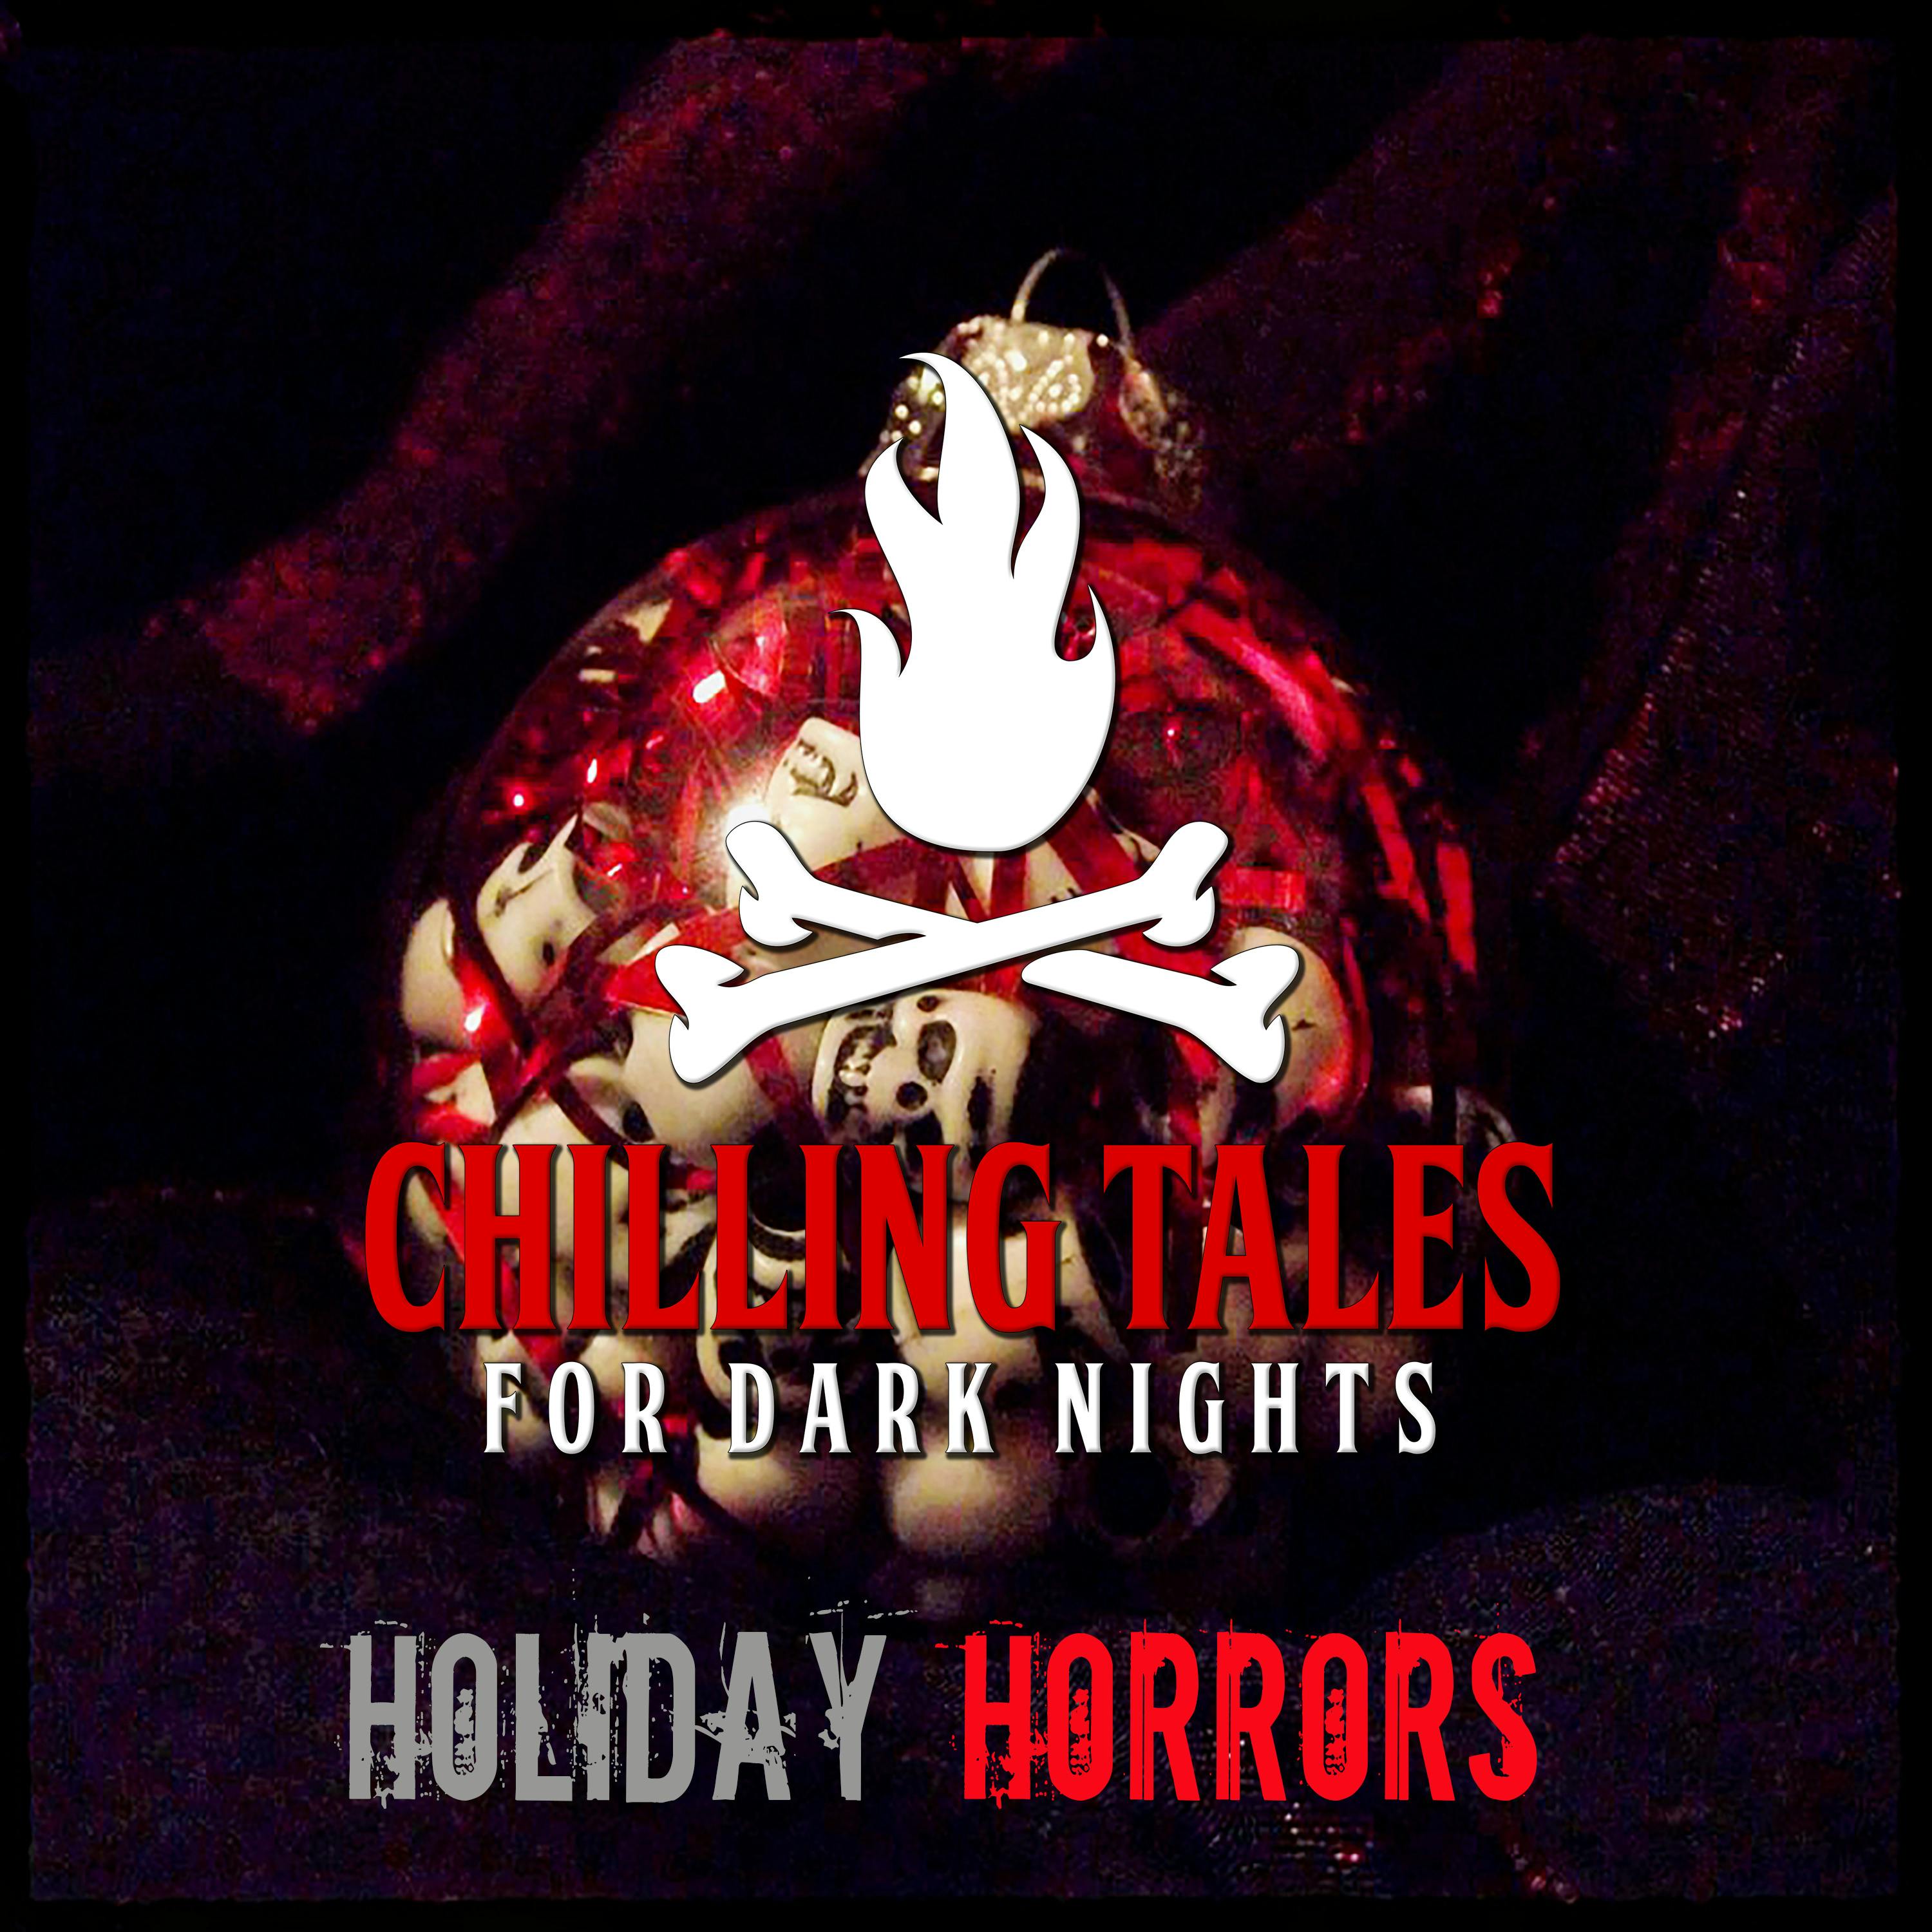 169: Holiday Horrors  - Chilling Tales for Dark Nights